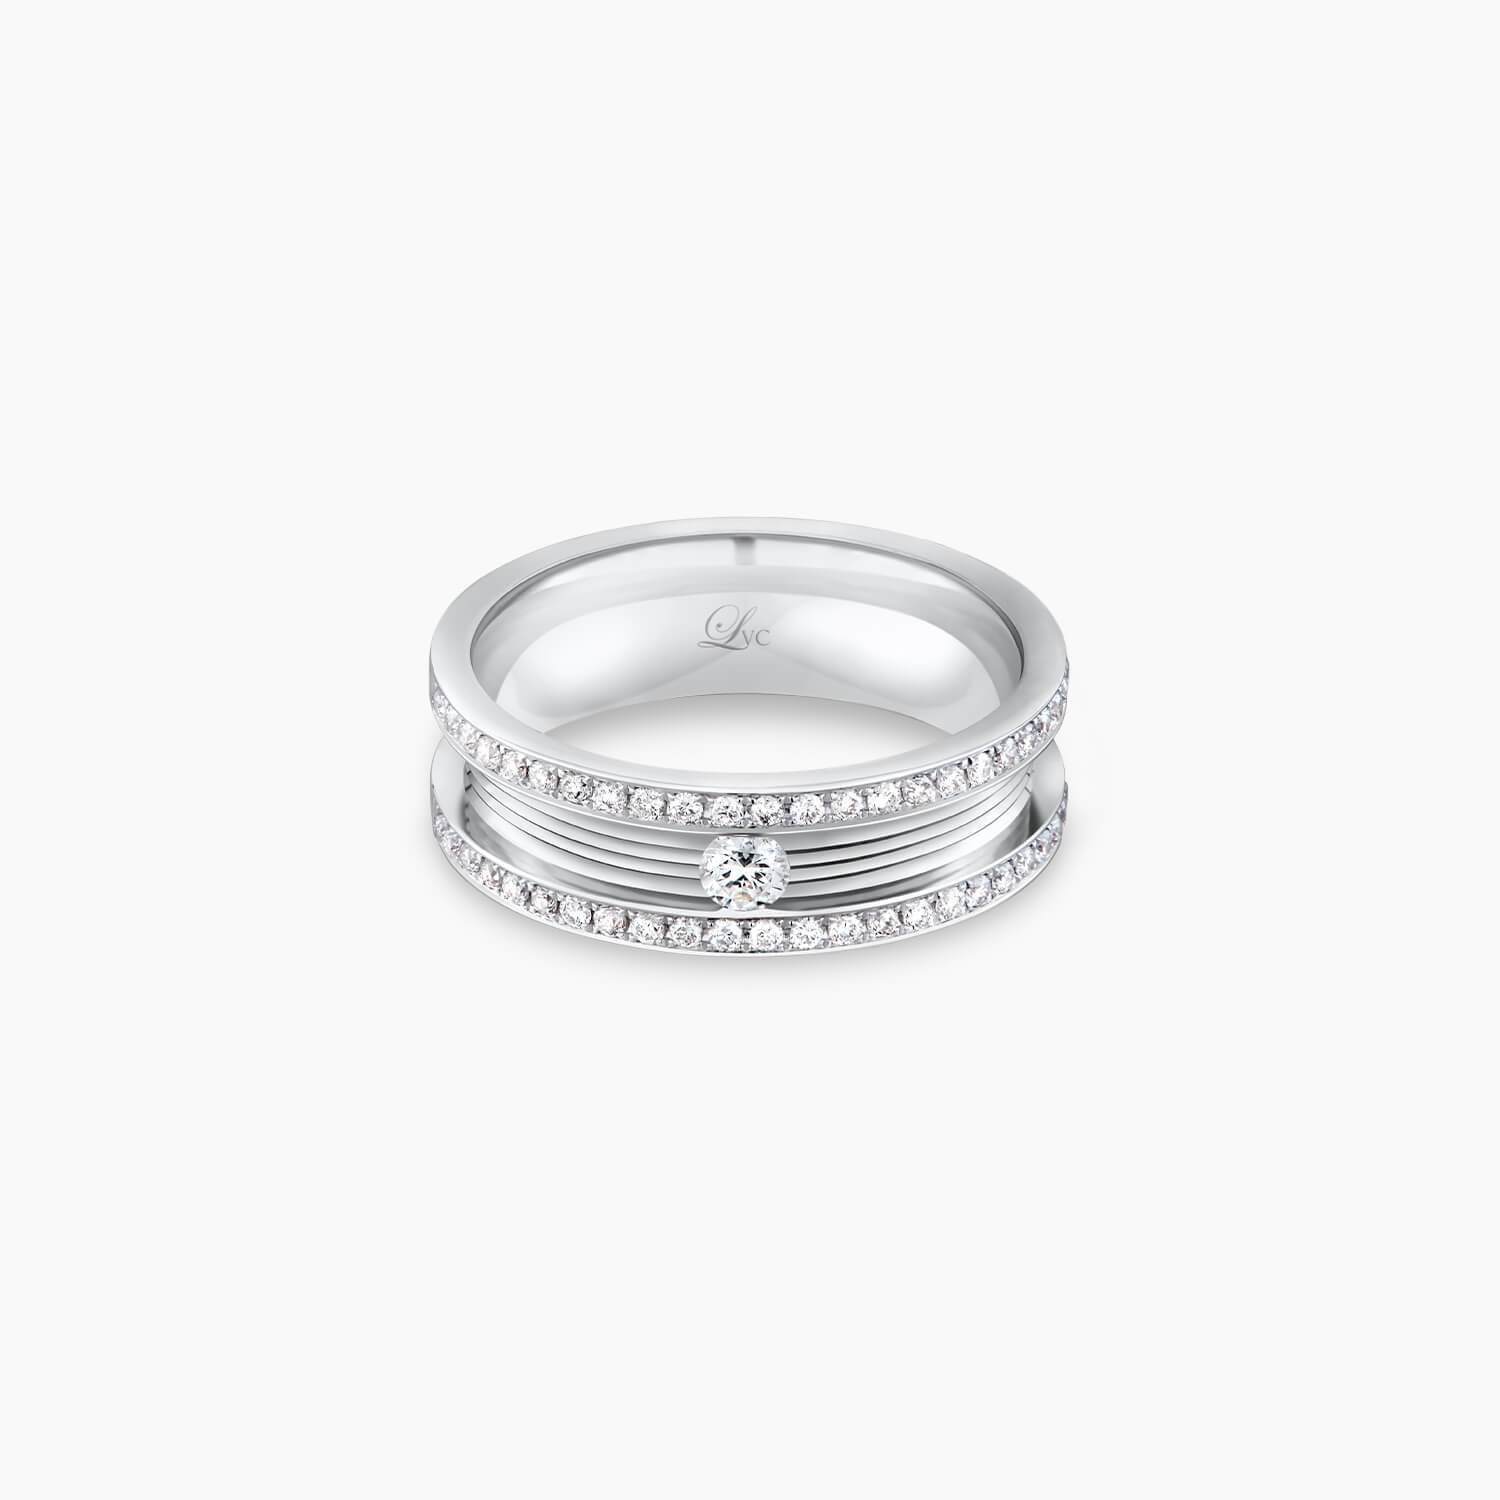 LVCPROMISE ETERNITY WEDDING BAND IN WHITE GOLD WITH A CENTER SOLITAIRE DIAMOND a white gold engagement ring wedding ring in 18k white gold with 32 diamonds cincin diamond 钻石 戒指